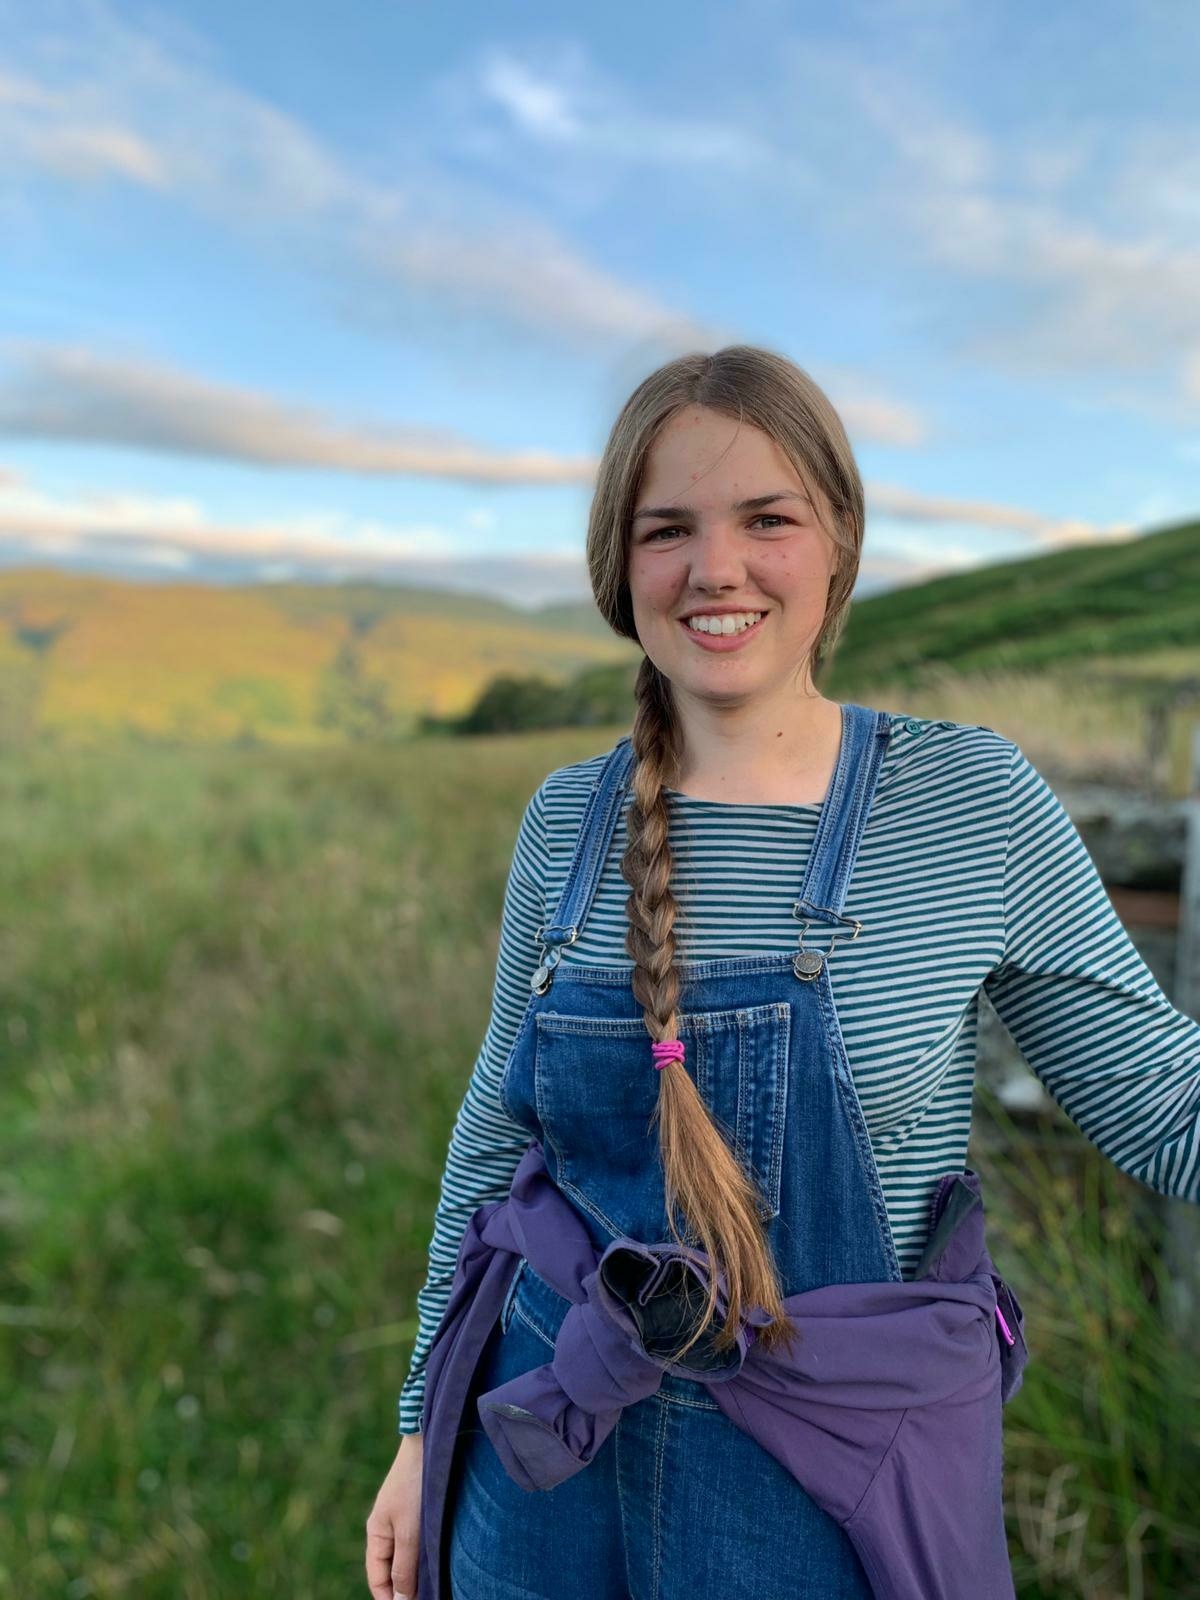 Young storyteller, Ailsa Dixon, smiles at the camera against a background of blue skies and mountains.